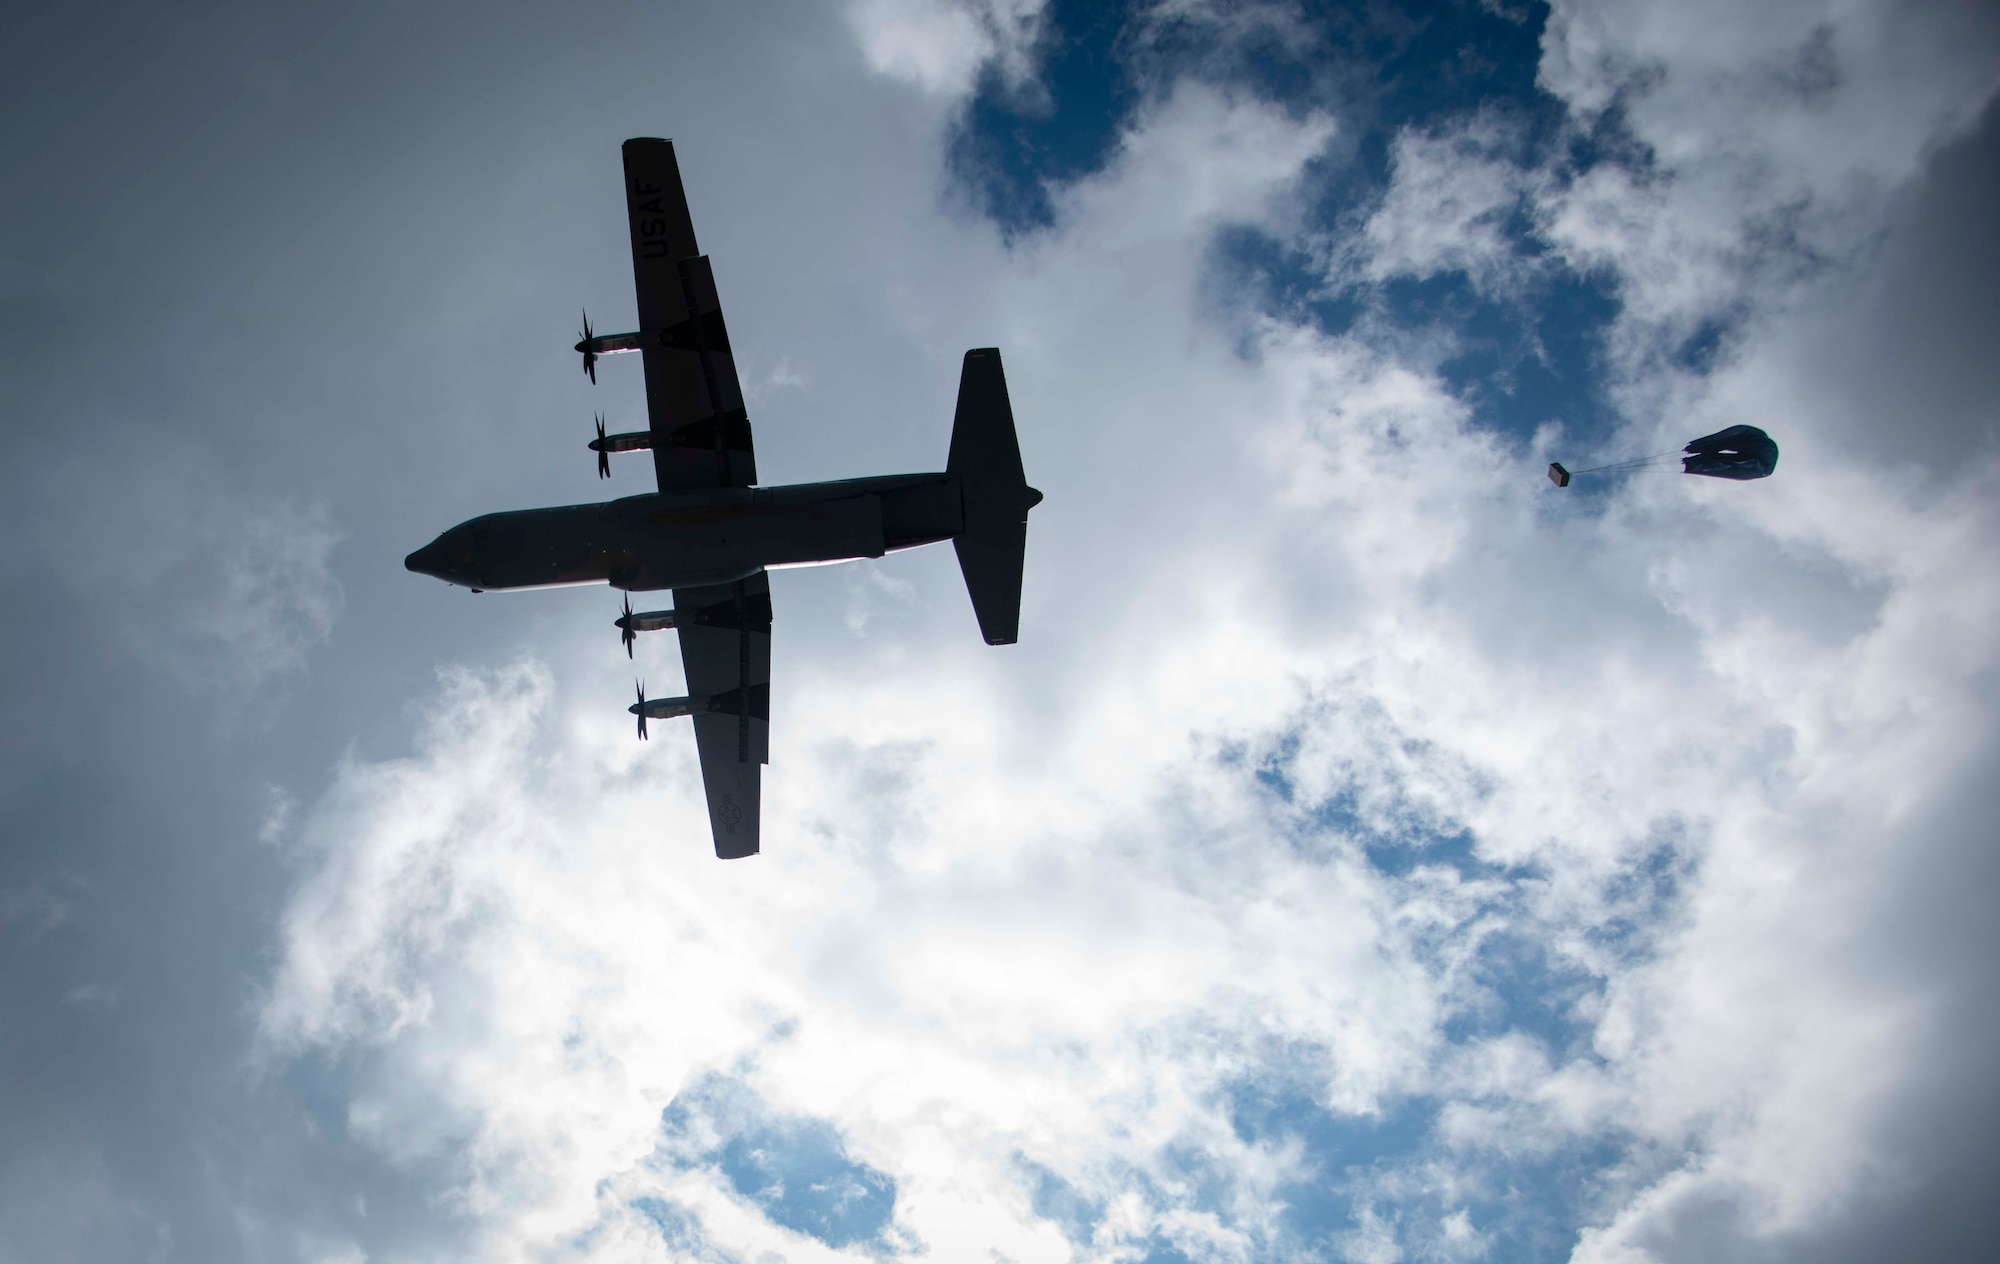 Cargo parachutes toward the drop zone as C-130 aircraft perform a formation airdrop near Charleston, W. Va., Aug. 24, 2020. Eight C-130s from Reserve and Guard partners participate in a week-long training event. The scenario was designed to test the abilities of Air Force Reserve units to execute rapid global mobility missions in challenging, contested scenarios. (U.S. Air Force Reserve photo by Senior Airman Nathan Byrnes)